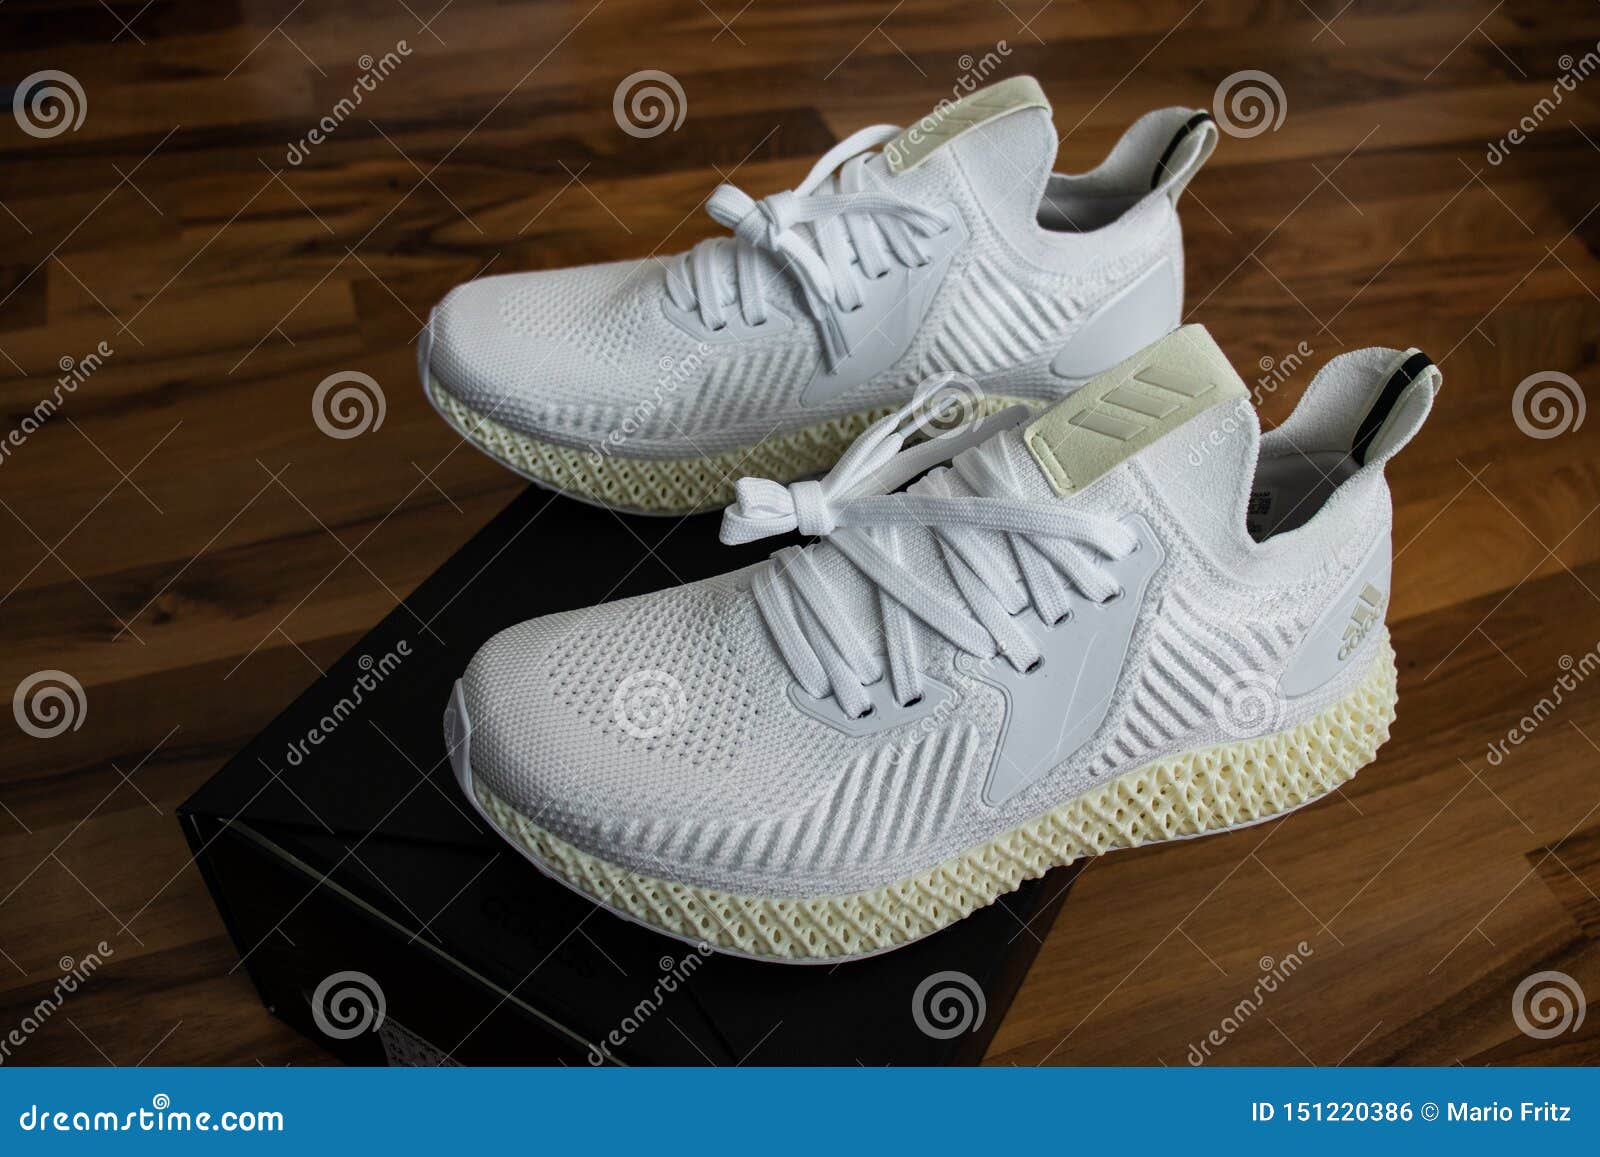 adidas shoes alphaedge d white yellow adidas shoes alphaedge d white yellow released may st adidas has propagated 151220386